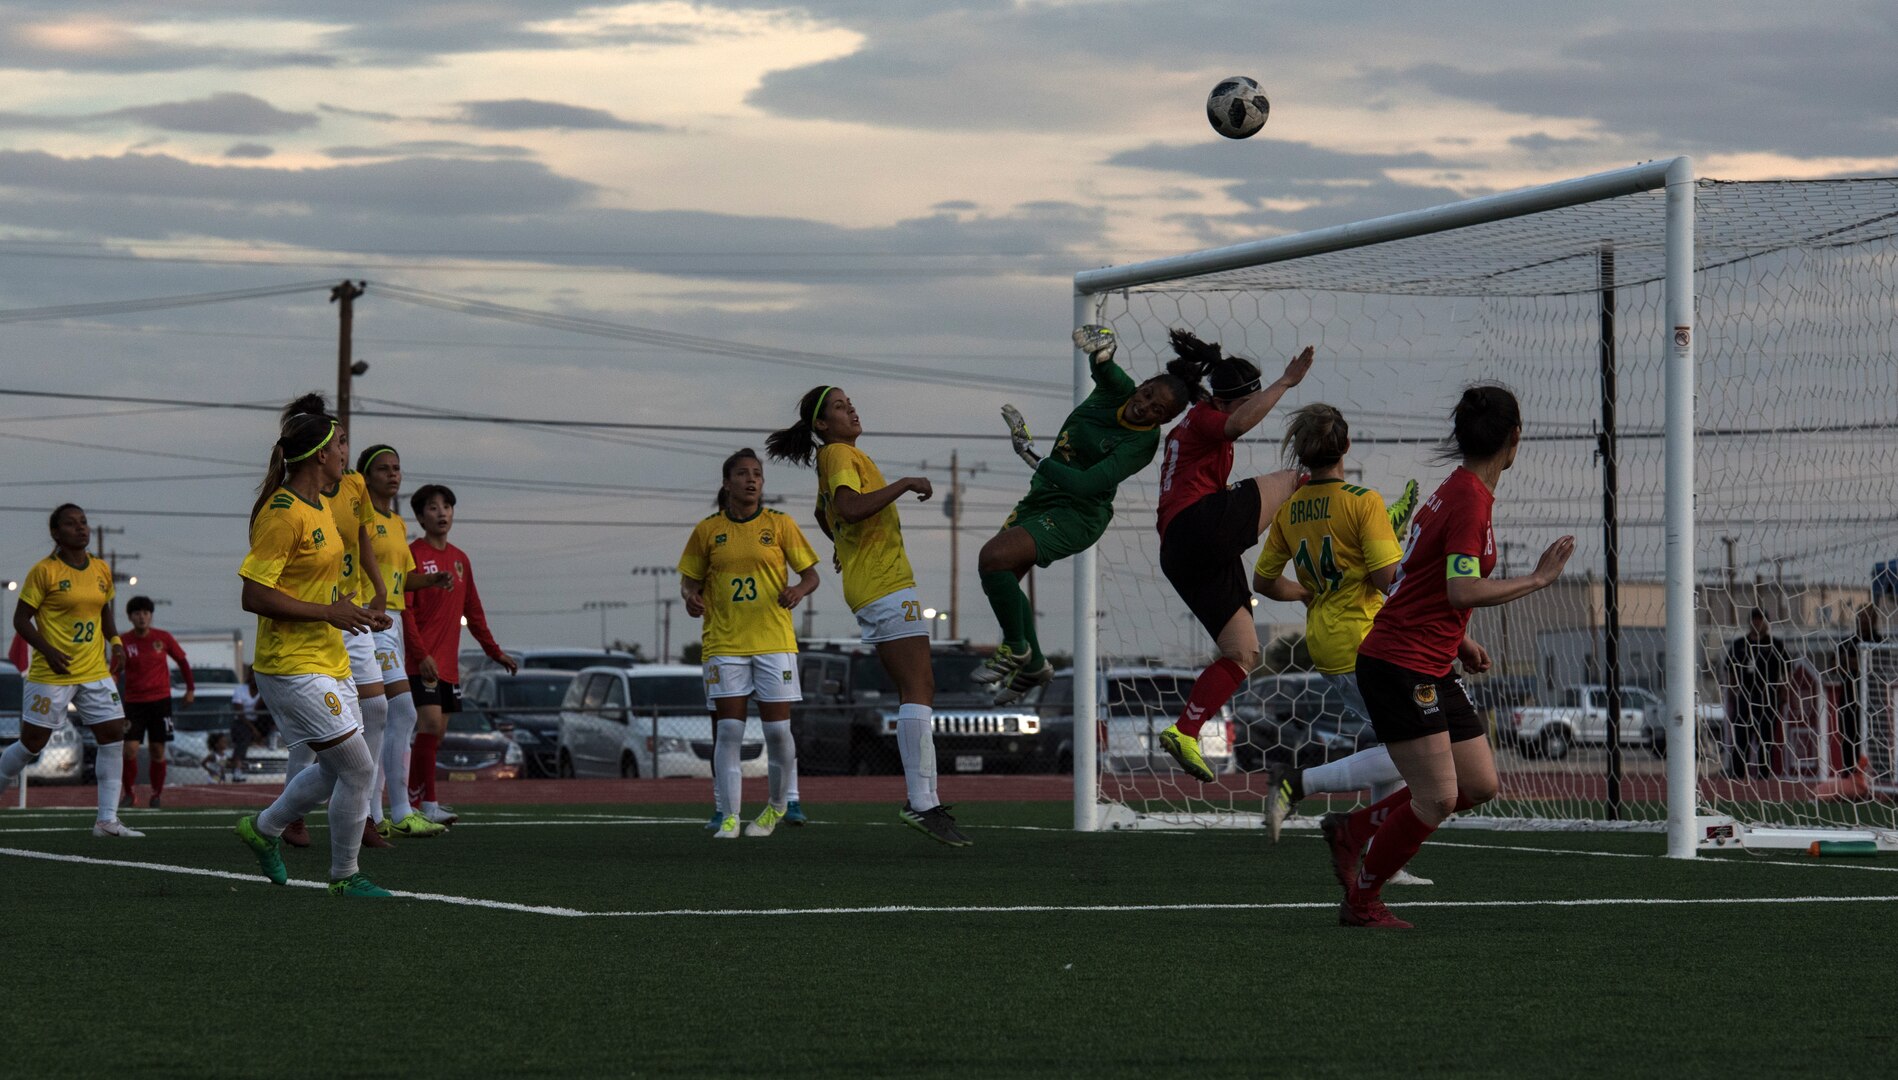 2018. Elite military soccer players from around the world squared off during the tournament to determine who were the best women soccer players among the international militaries participating